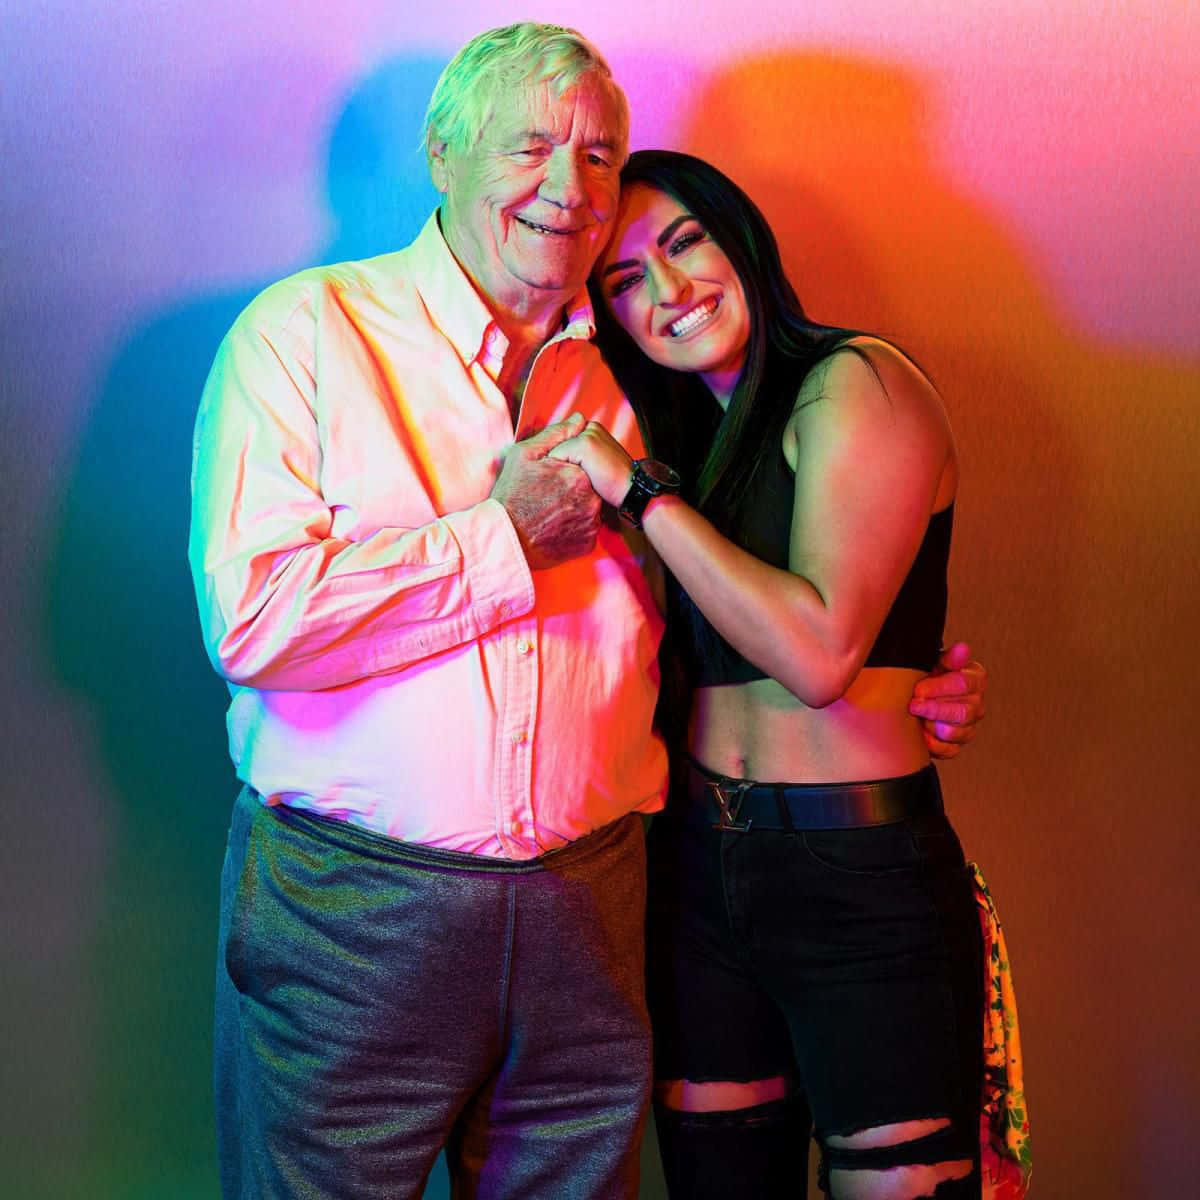 Pat Patterson With Sonya Deville Wallpaper